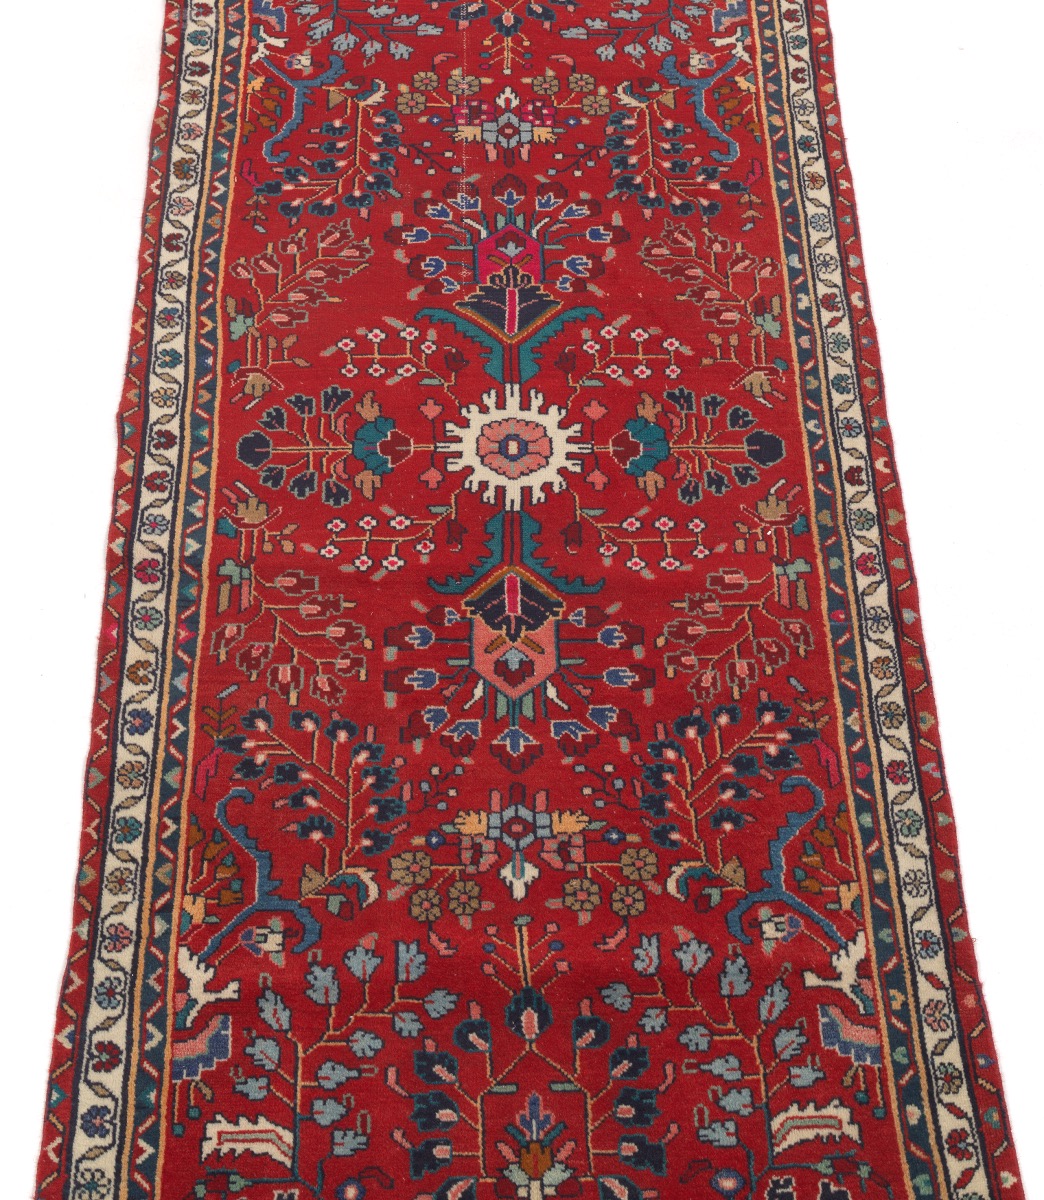 Fine Semi-Antique Hand Knotted Lilihan Carpet - Image 2 of 4